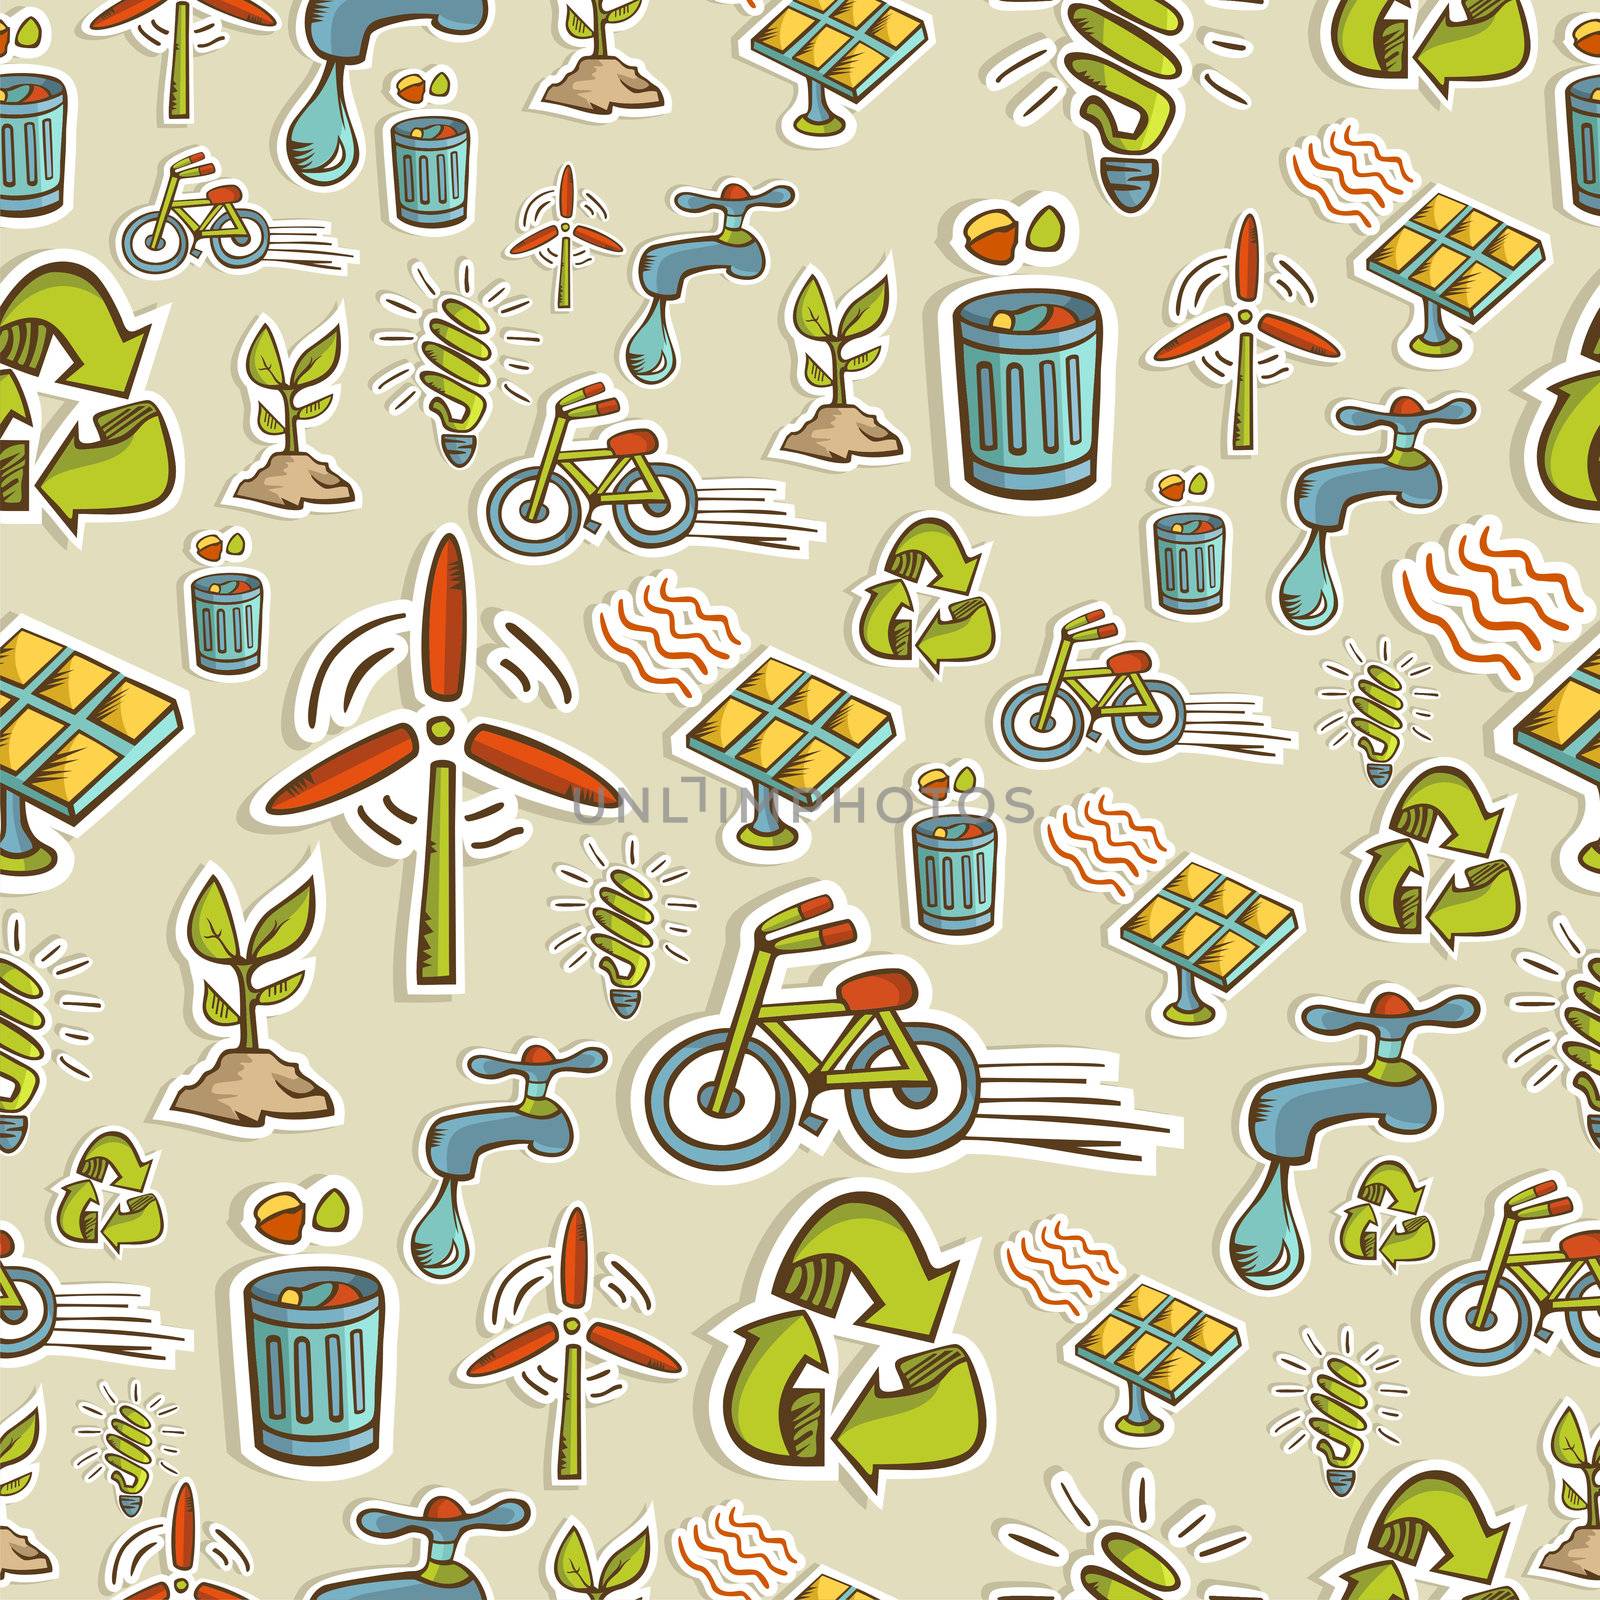 Ecology icons pattern by cienpies